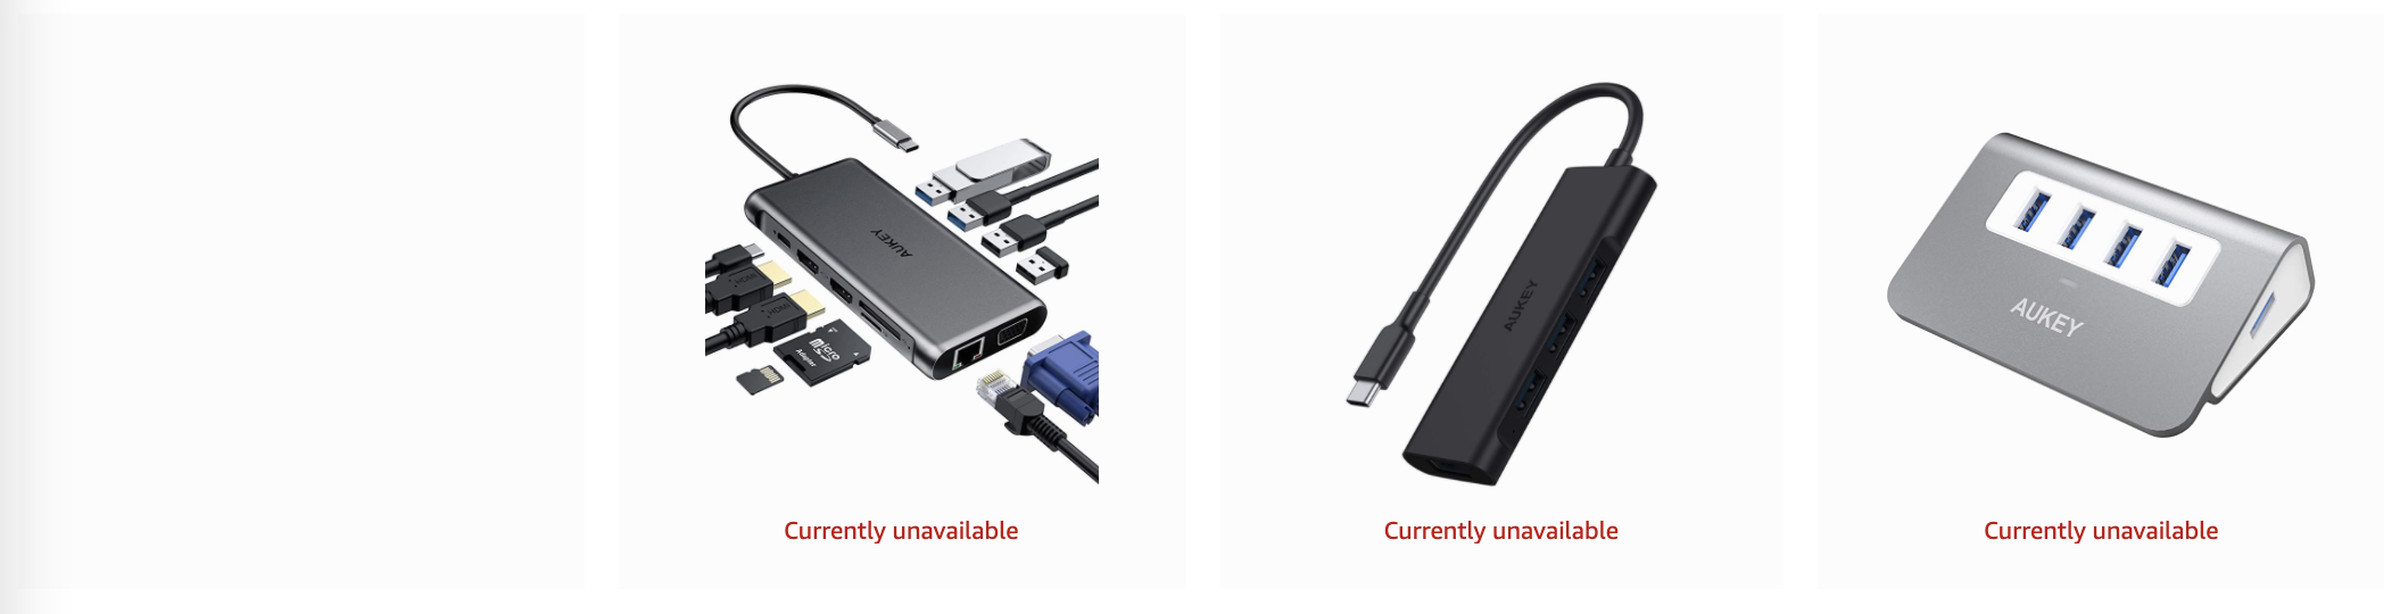 Many Aukey products are “currently unavailable.”